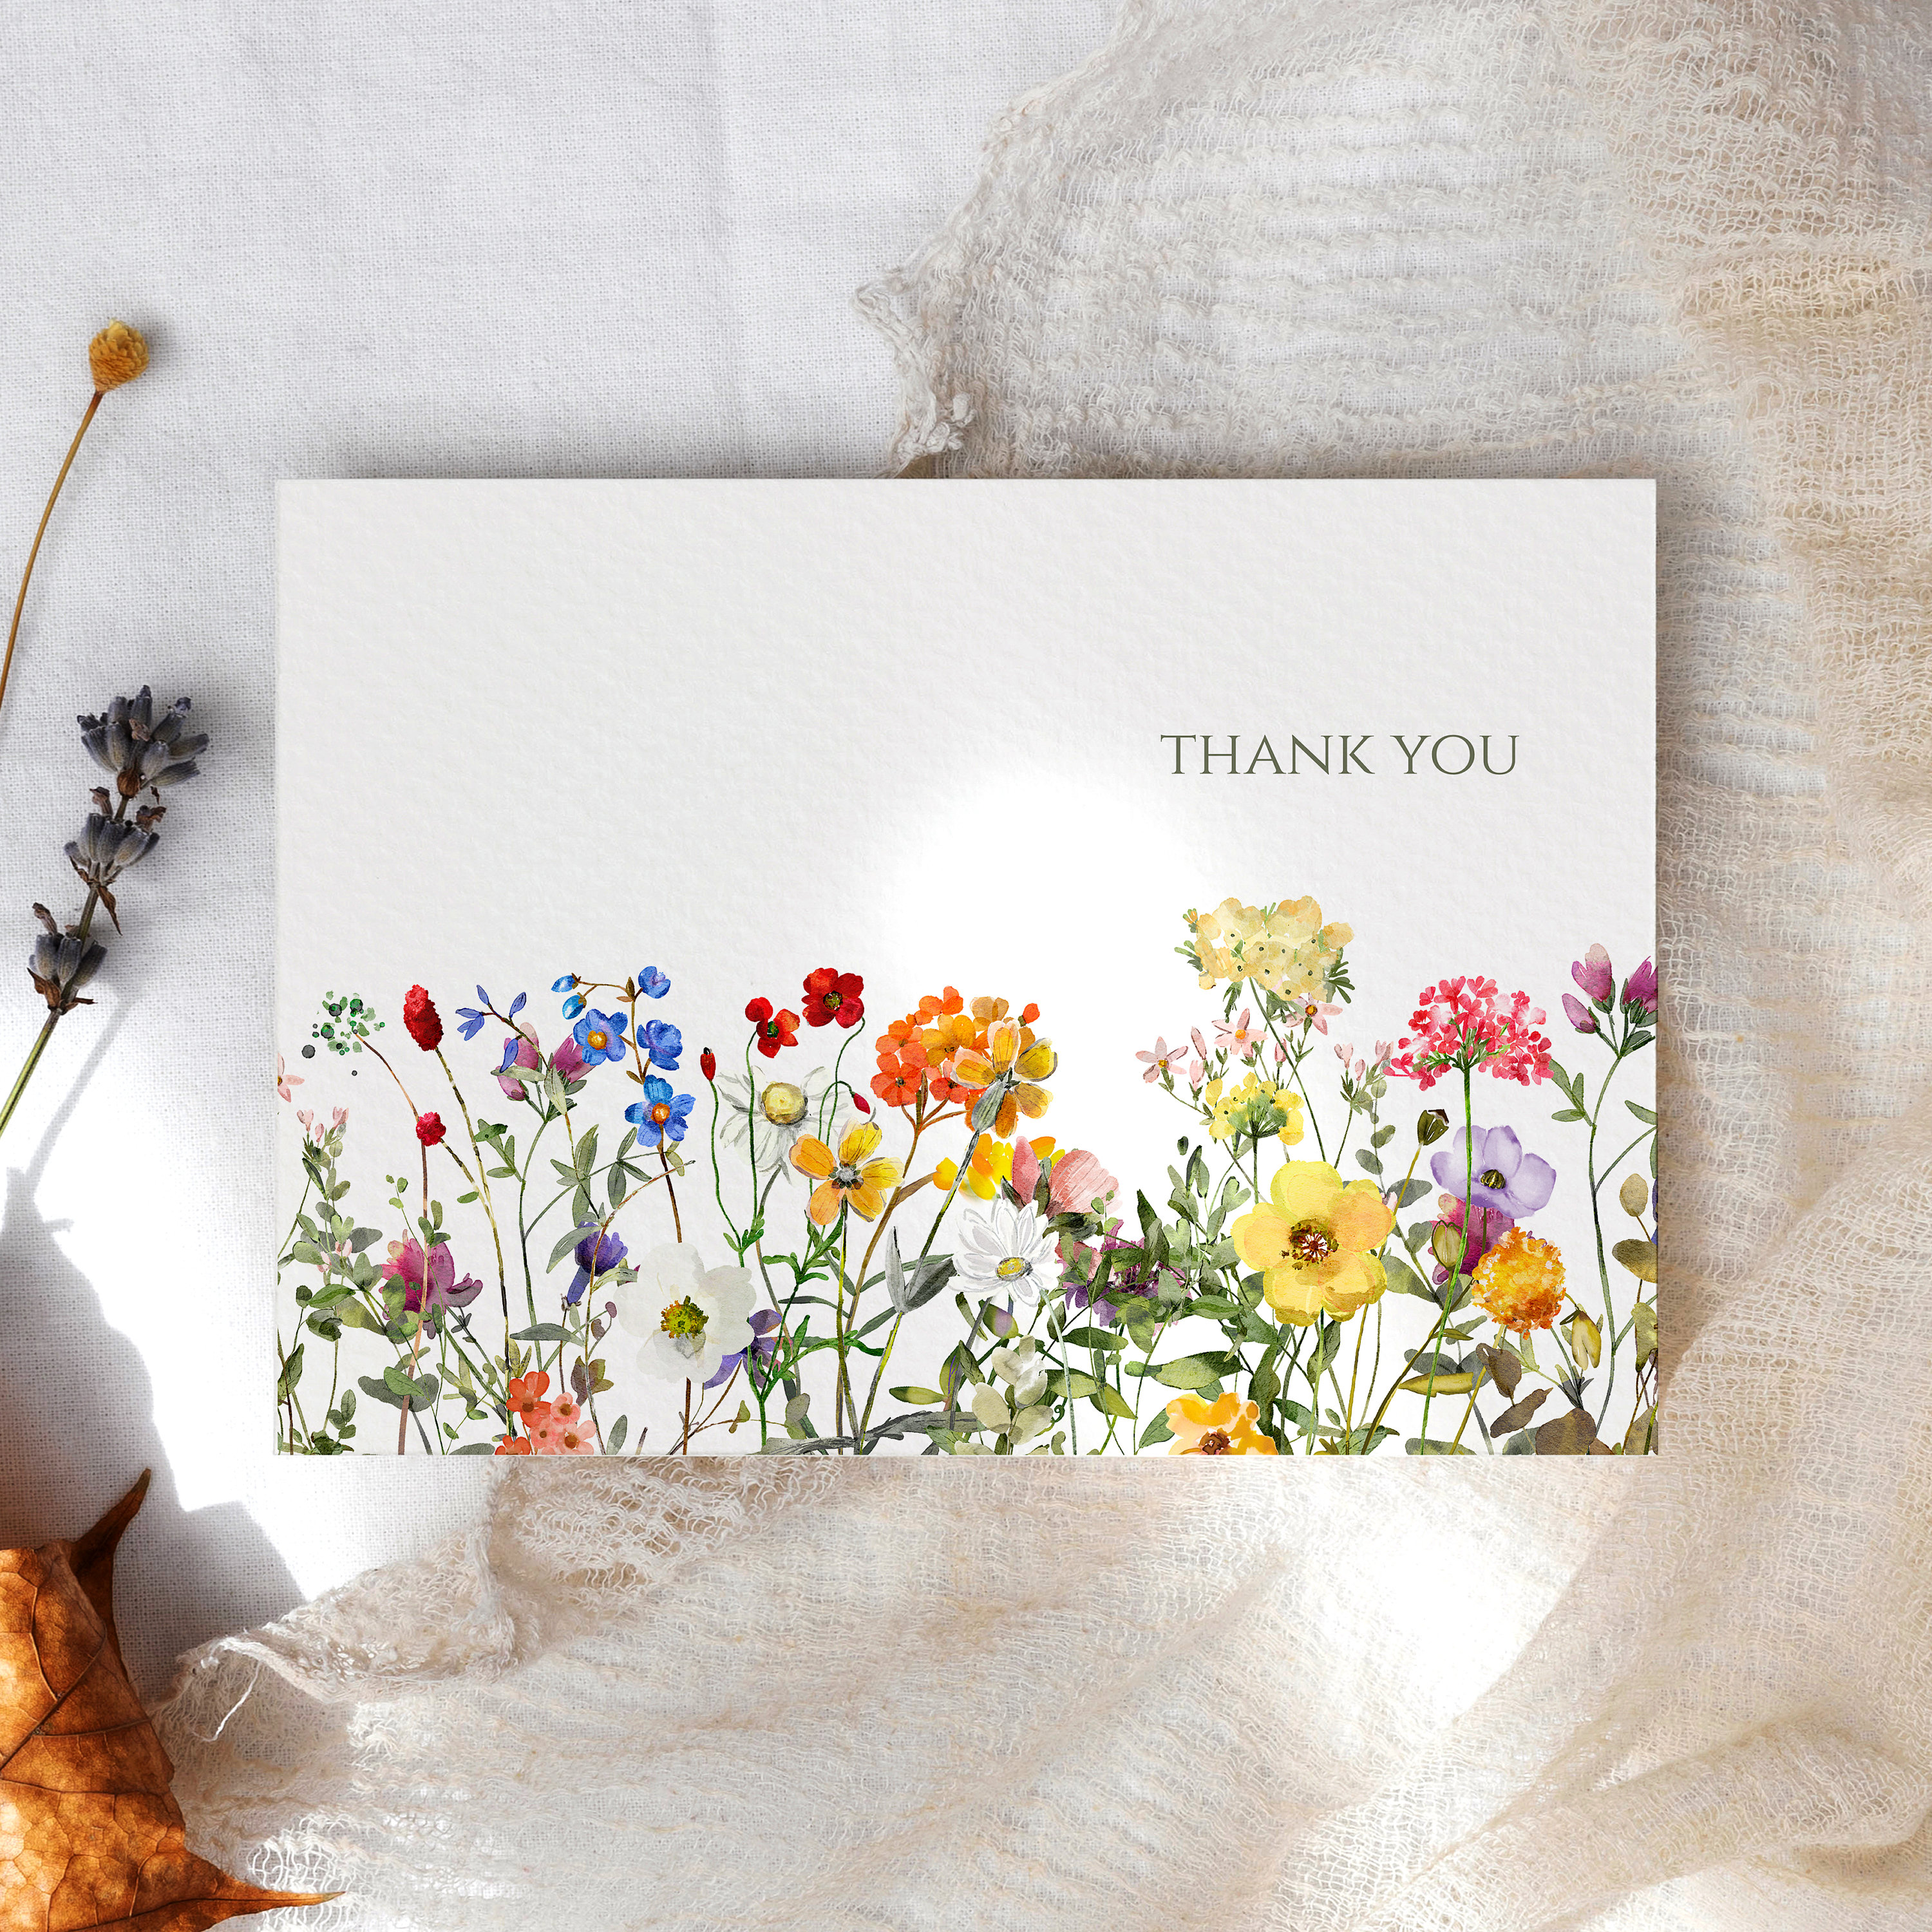 The Best Card Company - 1 Beautiful Thank You Card (8.5 x 11 Inch) - Pretty  Flowers, Floral Gratitude Stationery Notecard with Envelope - Many Thanks